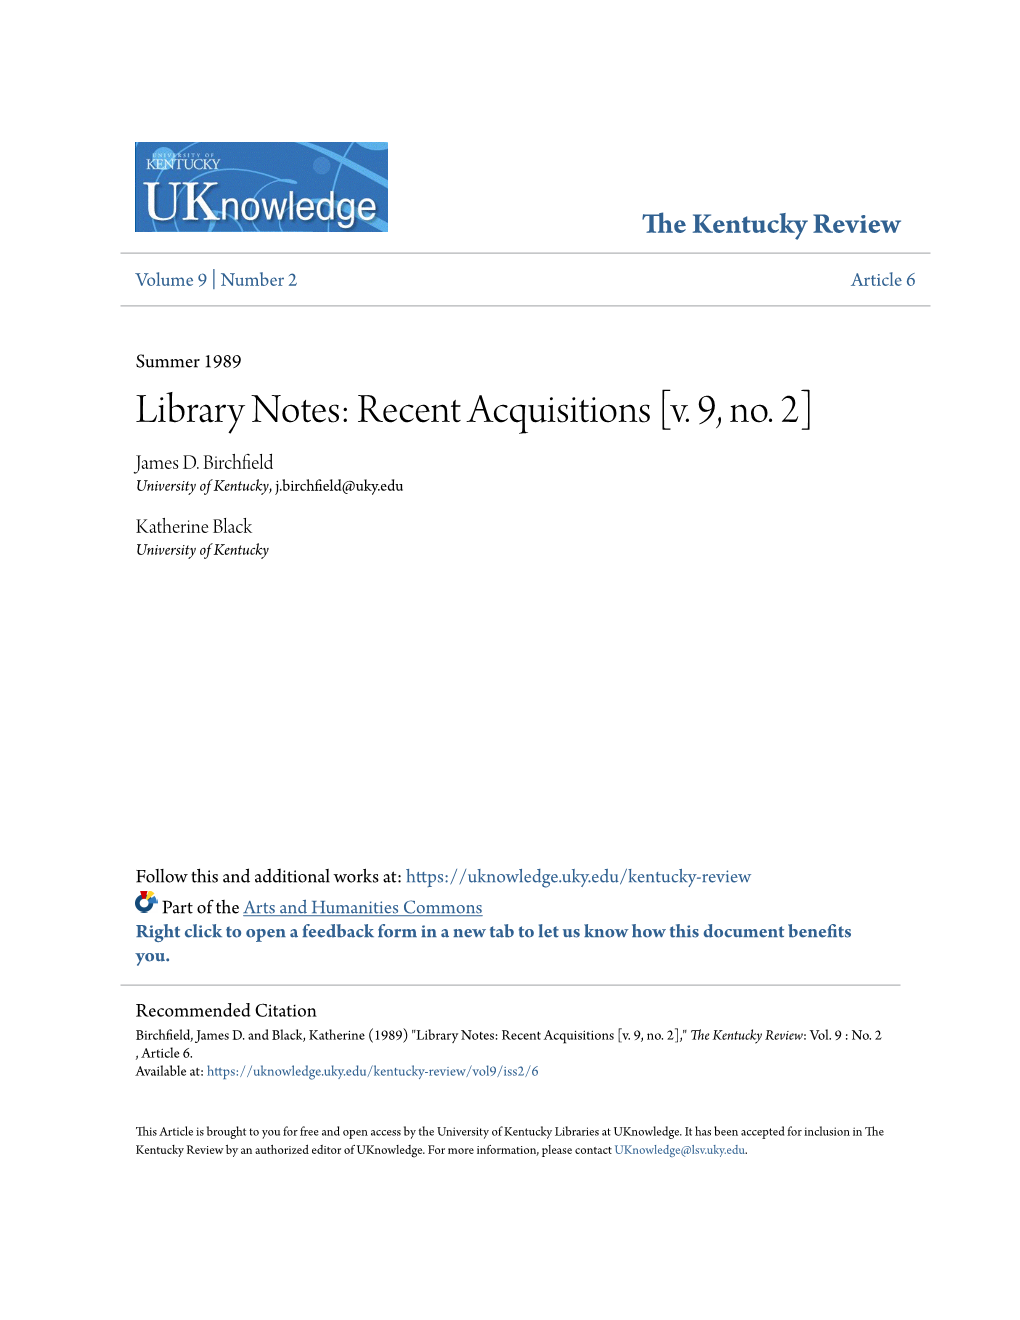 Library Notes: Recent Acquisitions [V